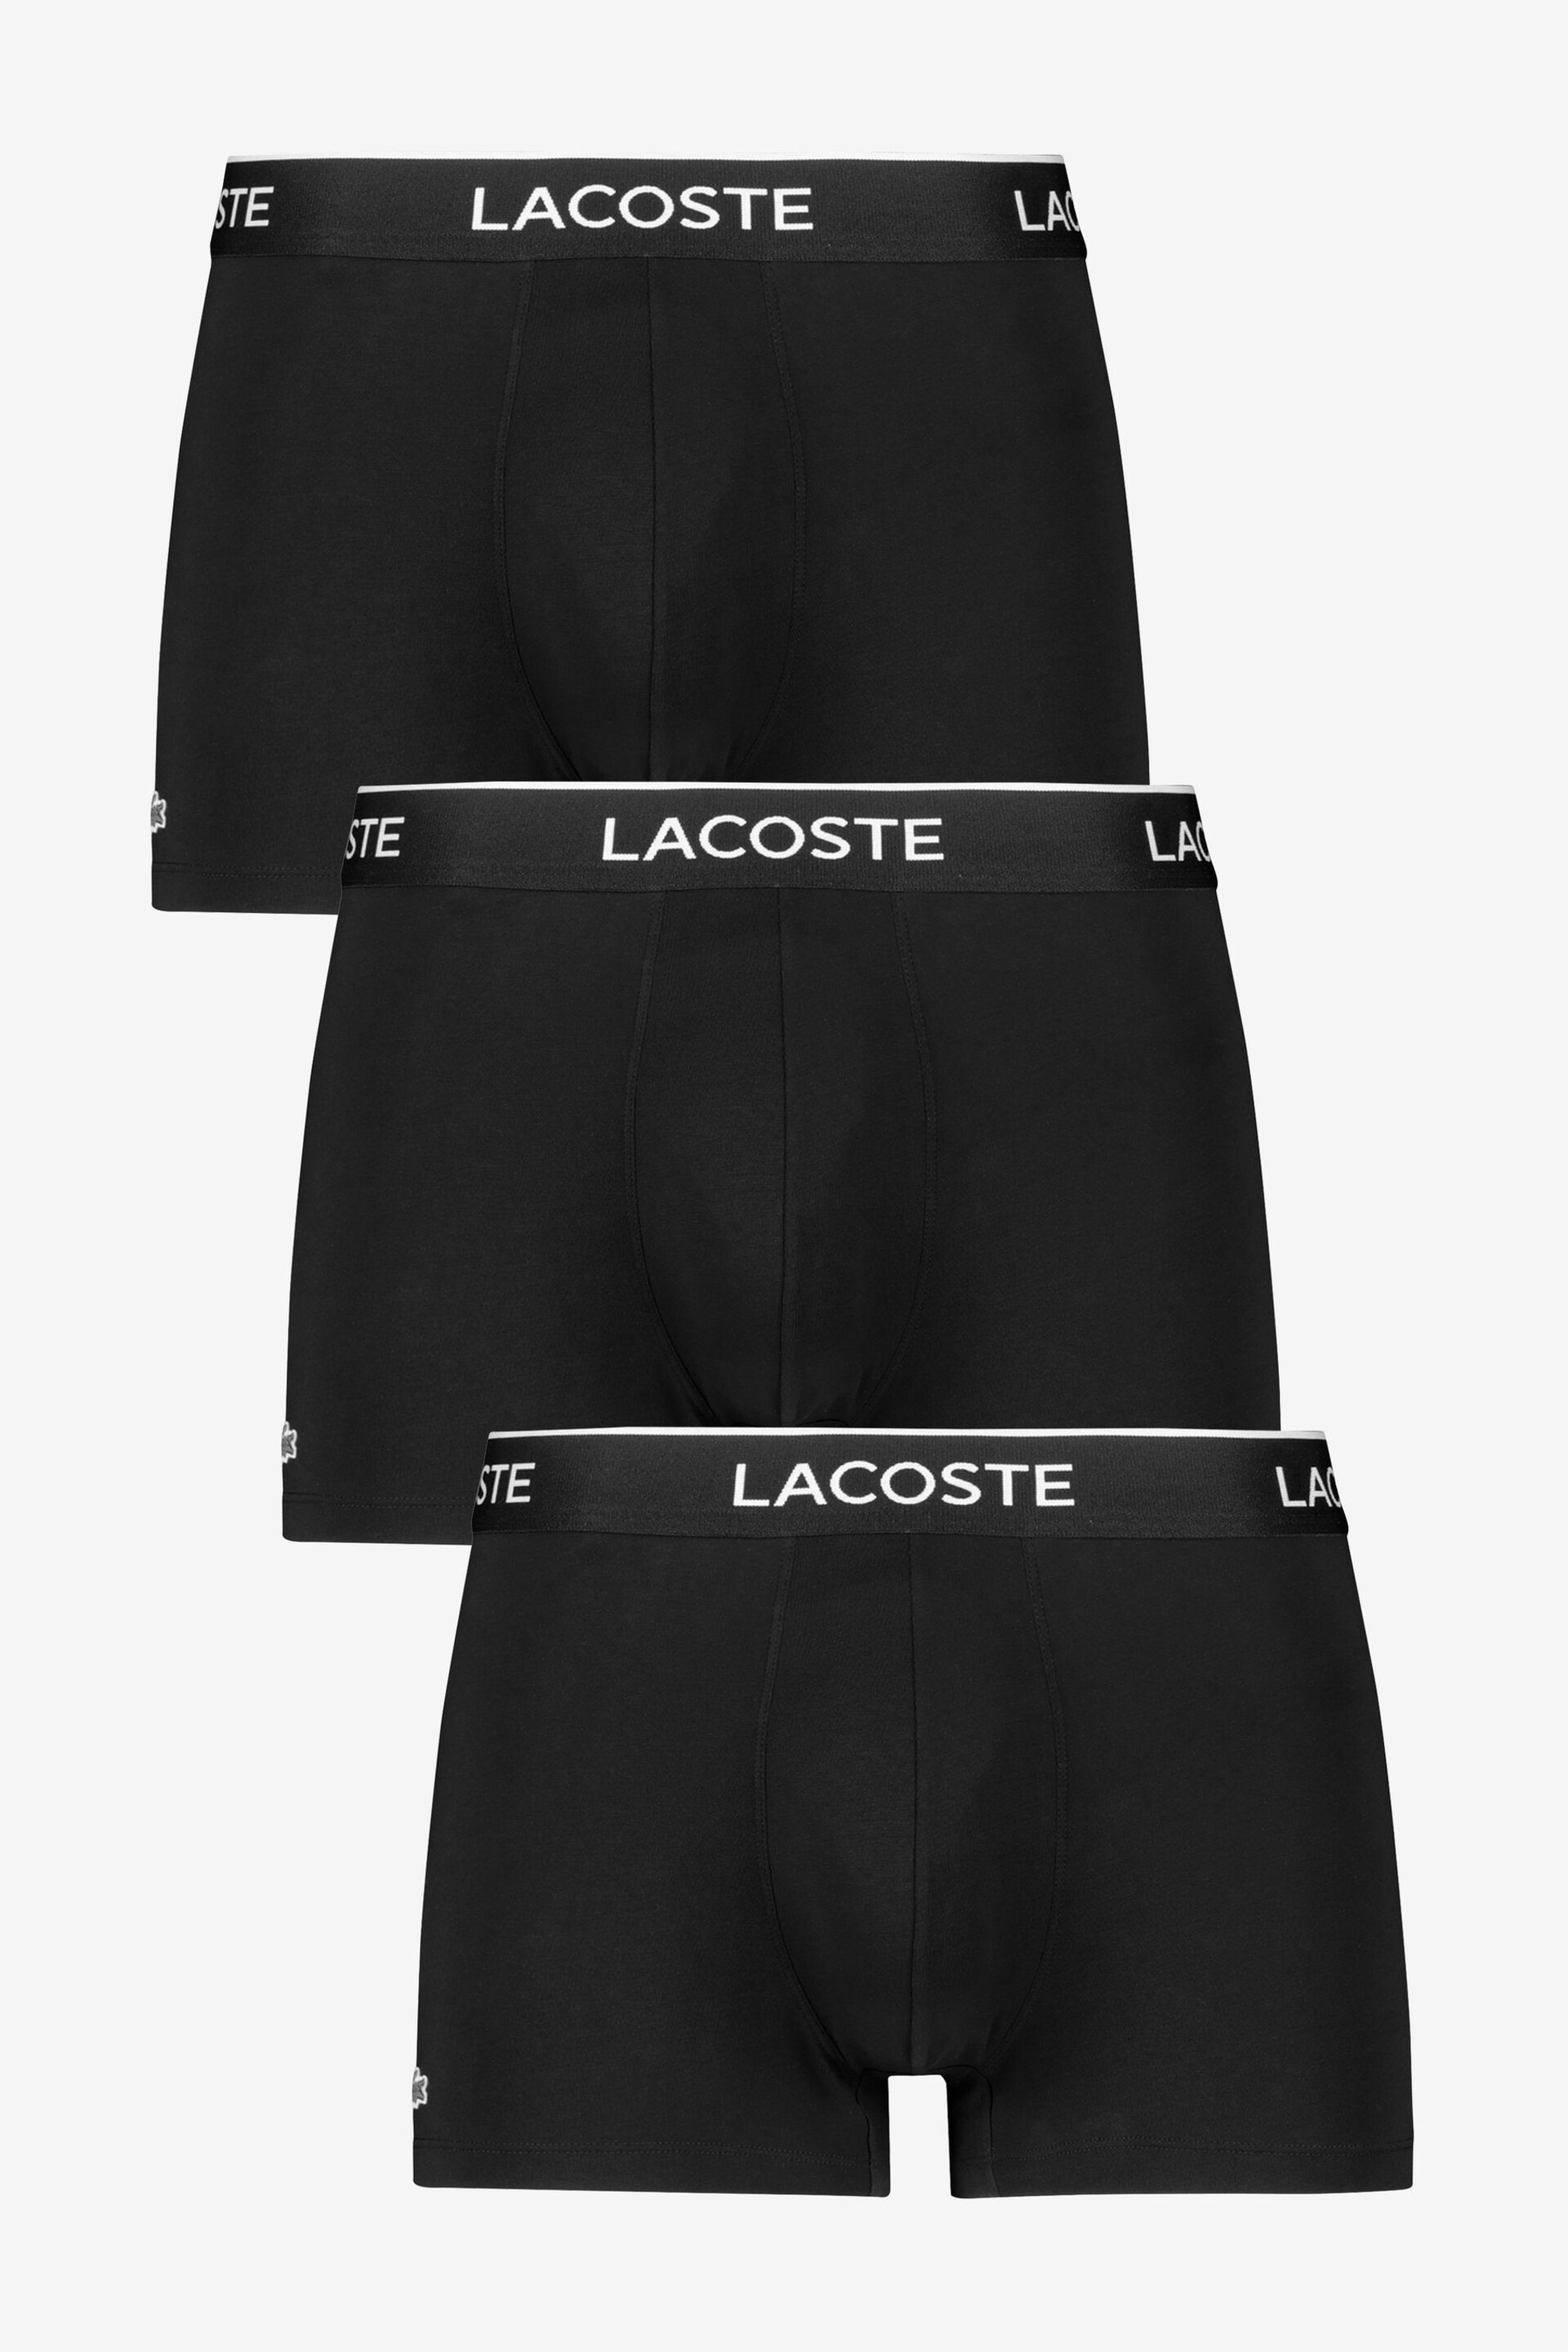 Lacoste Black Boxers 3 Packs - Image 1 of 2